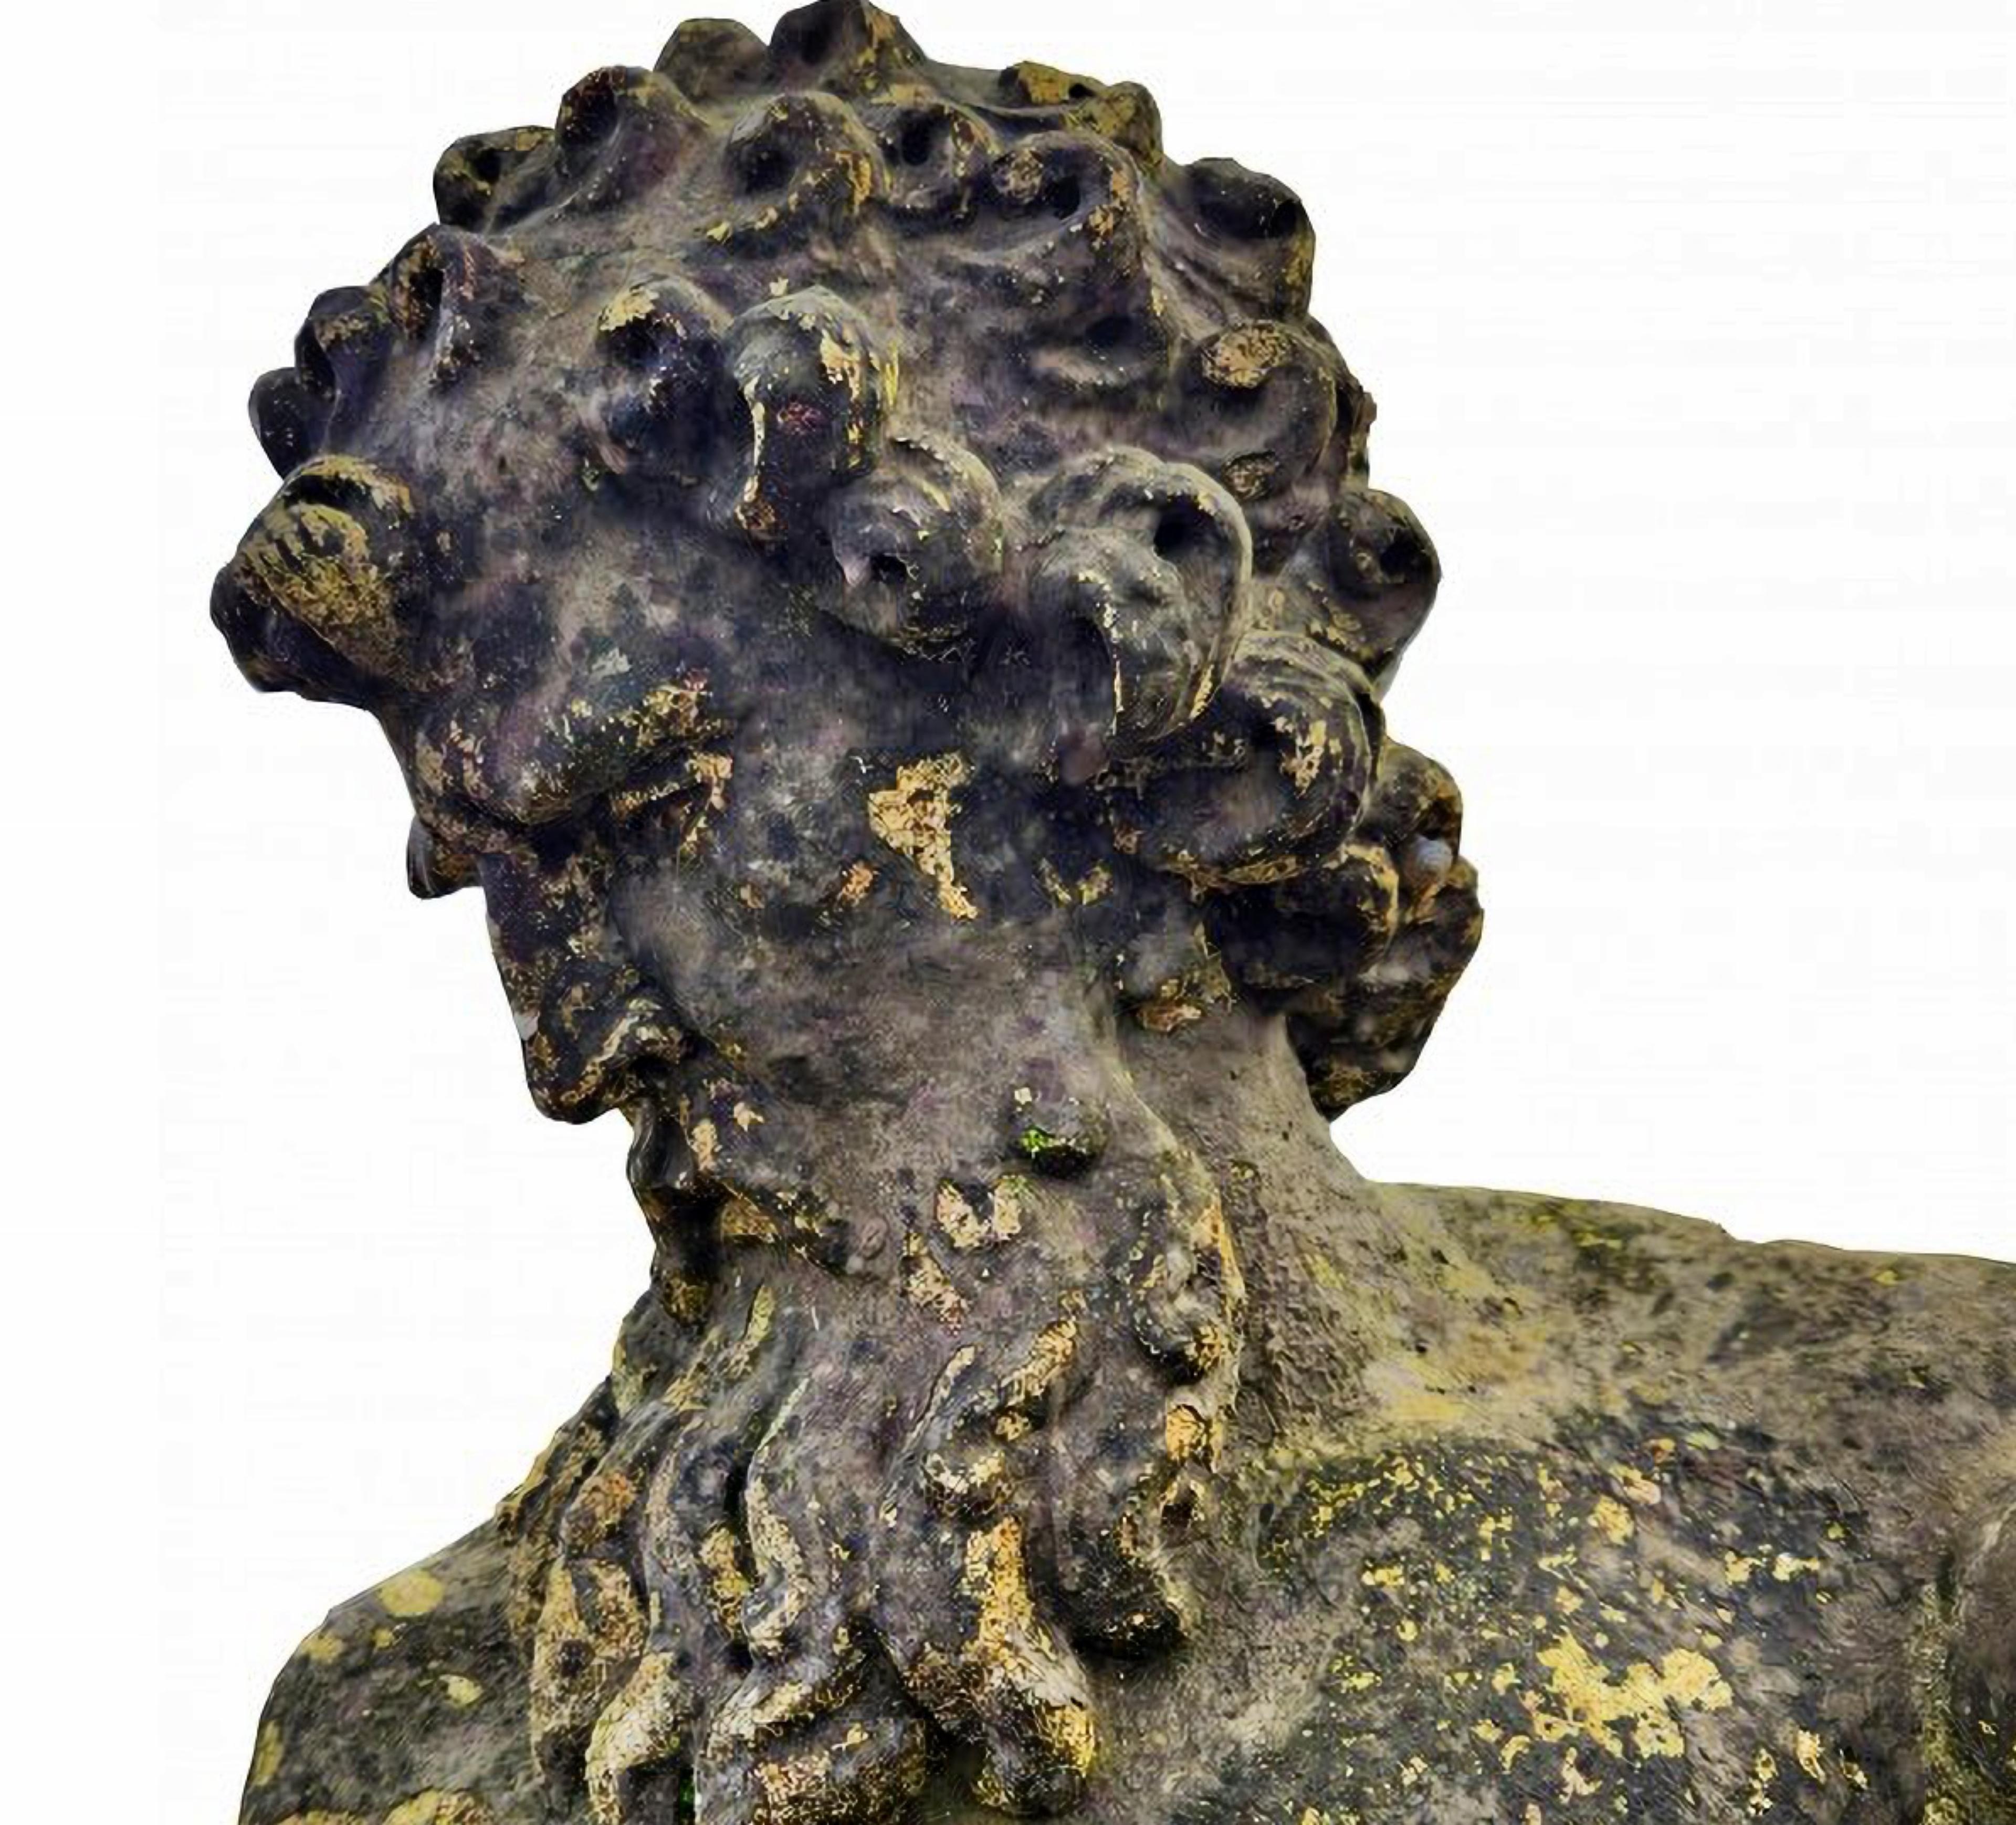 AMAZING ANTIQUE ACADEMIC COPY OF THE NEPTUNE STATUE BY GIANBOLOGNA 19th/20th Century

Academic copy with variations of the statue of Neptune by Gianbologna.
Original antique end 19th Century/began 20th
Beautiful antique patina with moss and